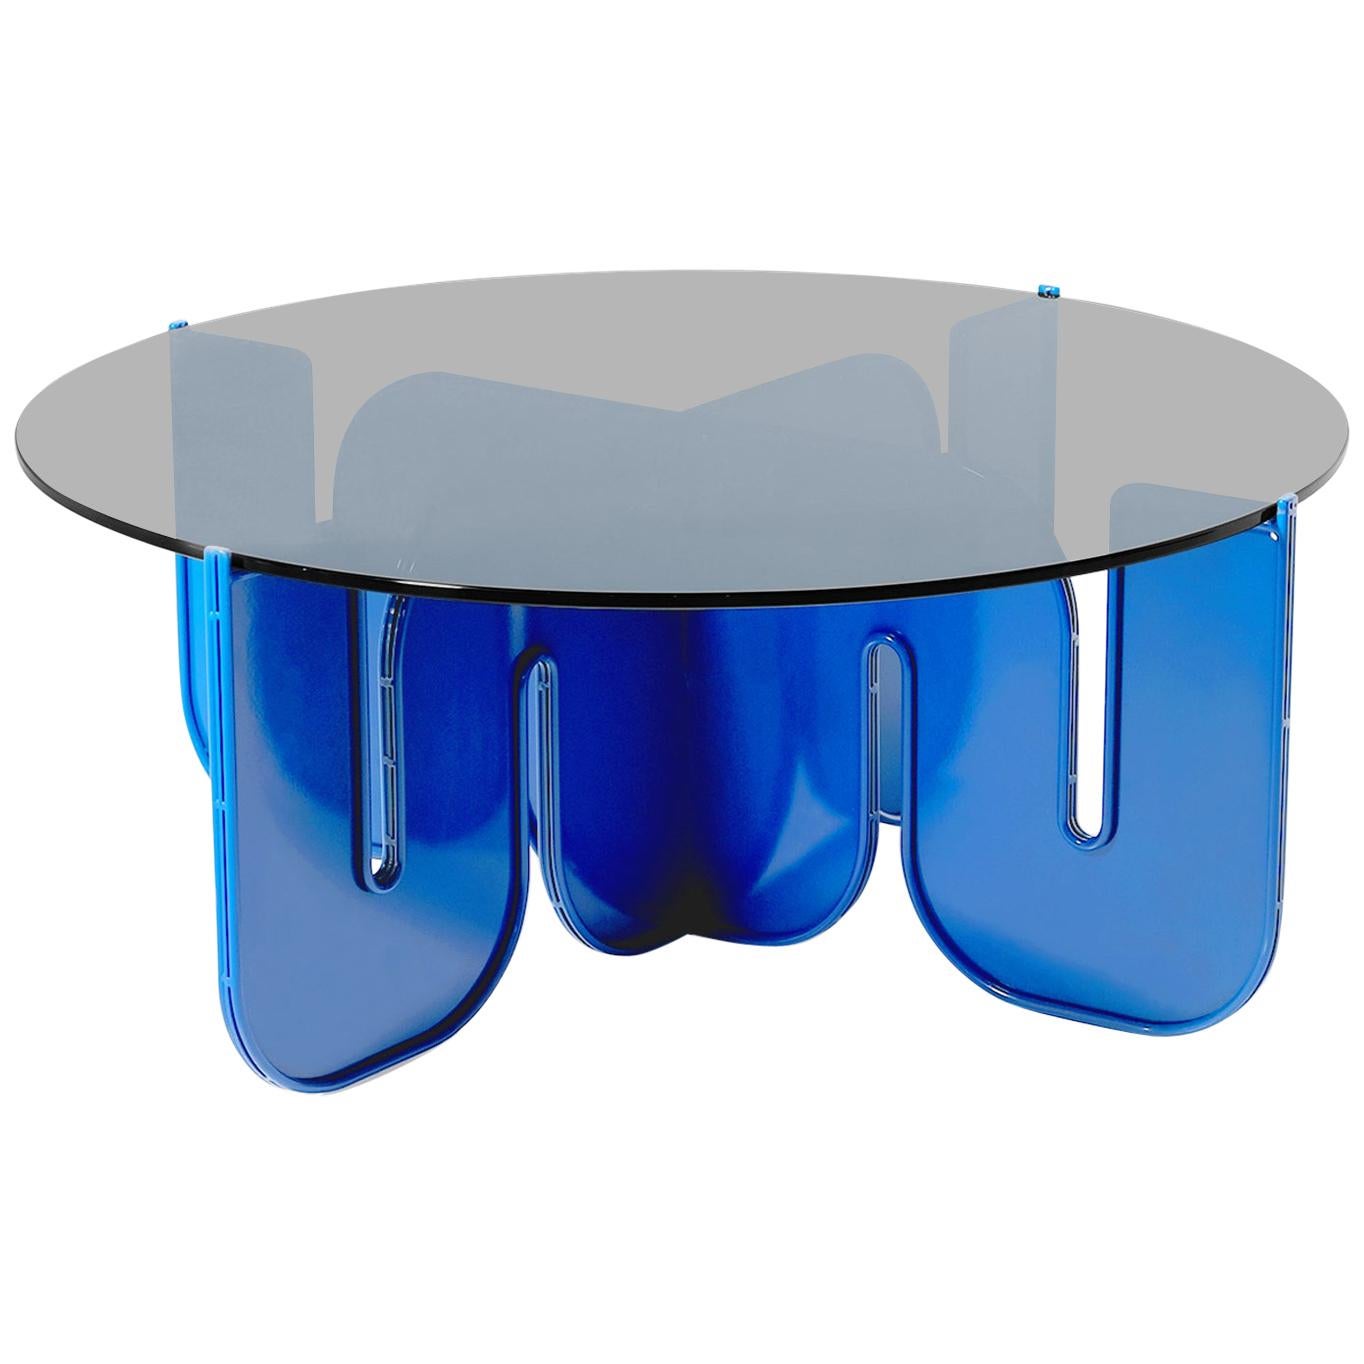 Modern Coffee Table, Flat Pack Center Table in Electric Blue, Smoke Glass